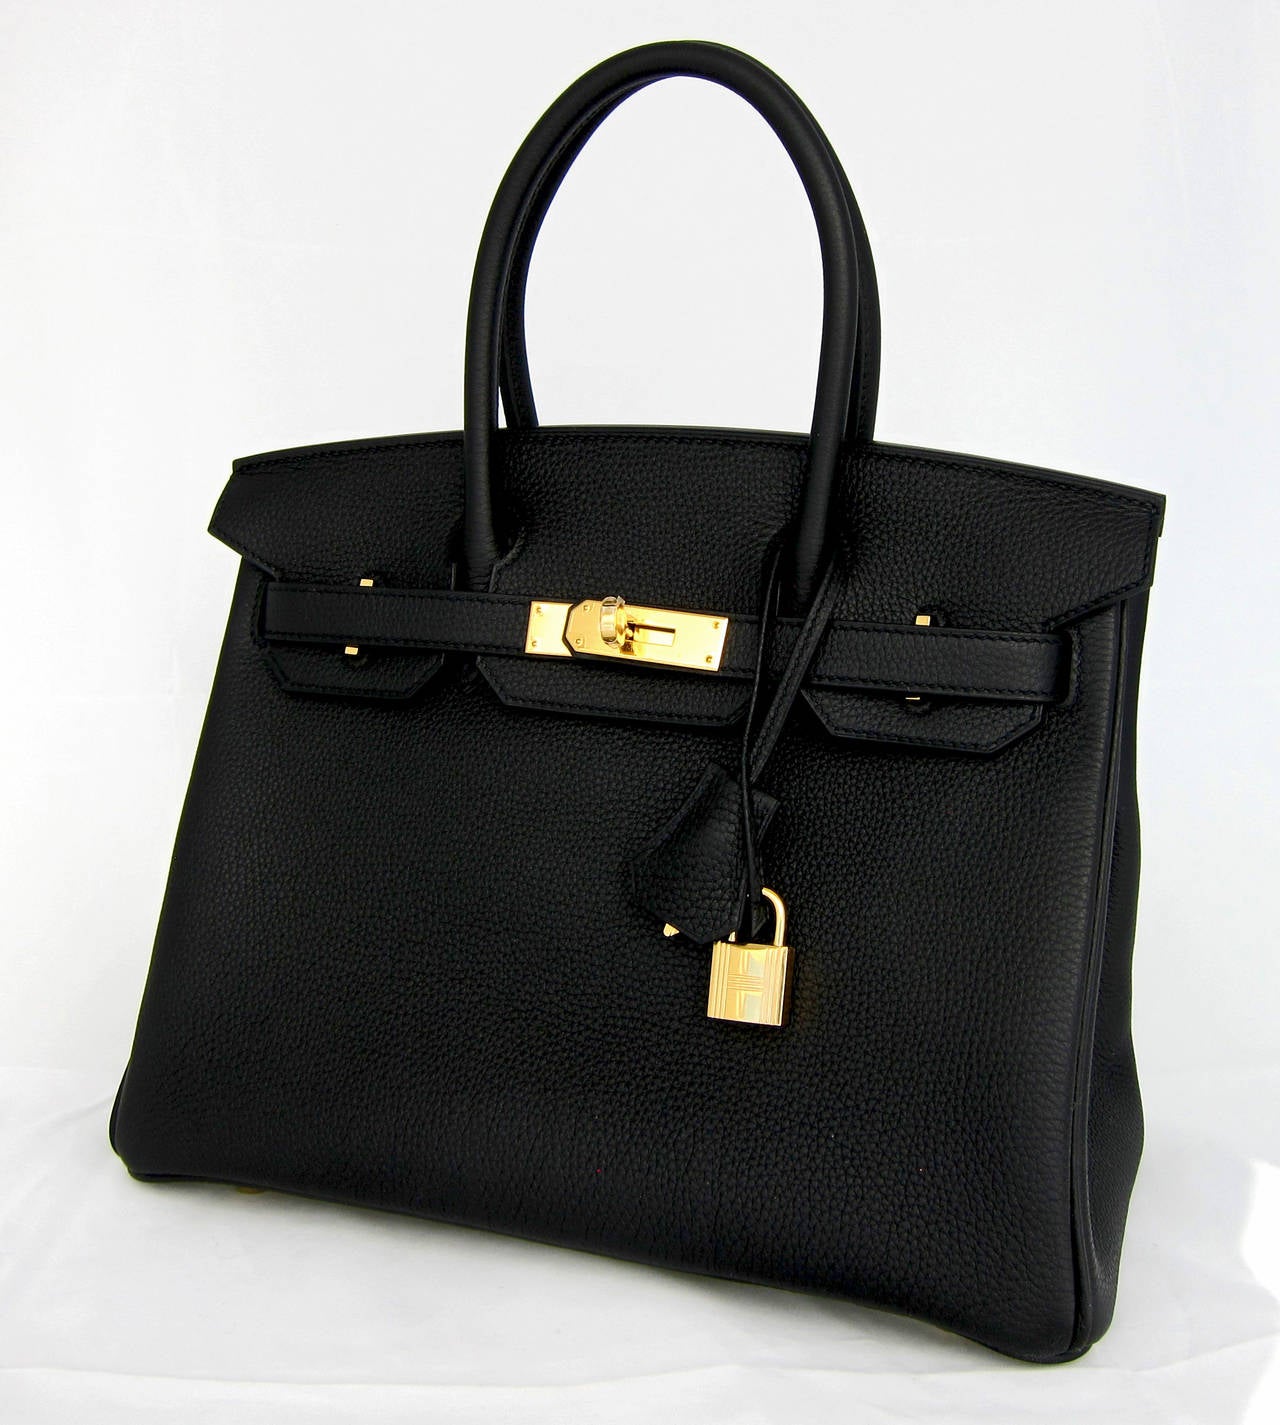 Hermes 30cm Black Birkin Togo Gold Hardware GHW Bag Tote

 Store Fresh.  Brand New in Box.  With plastic on hardware.
Comes full set with keys, lock, clochette, a sleeper for the bag, rain protector, Hermes ribbon, and original box.
The ultimate